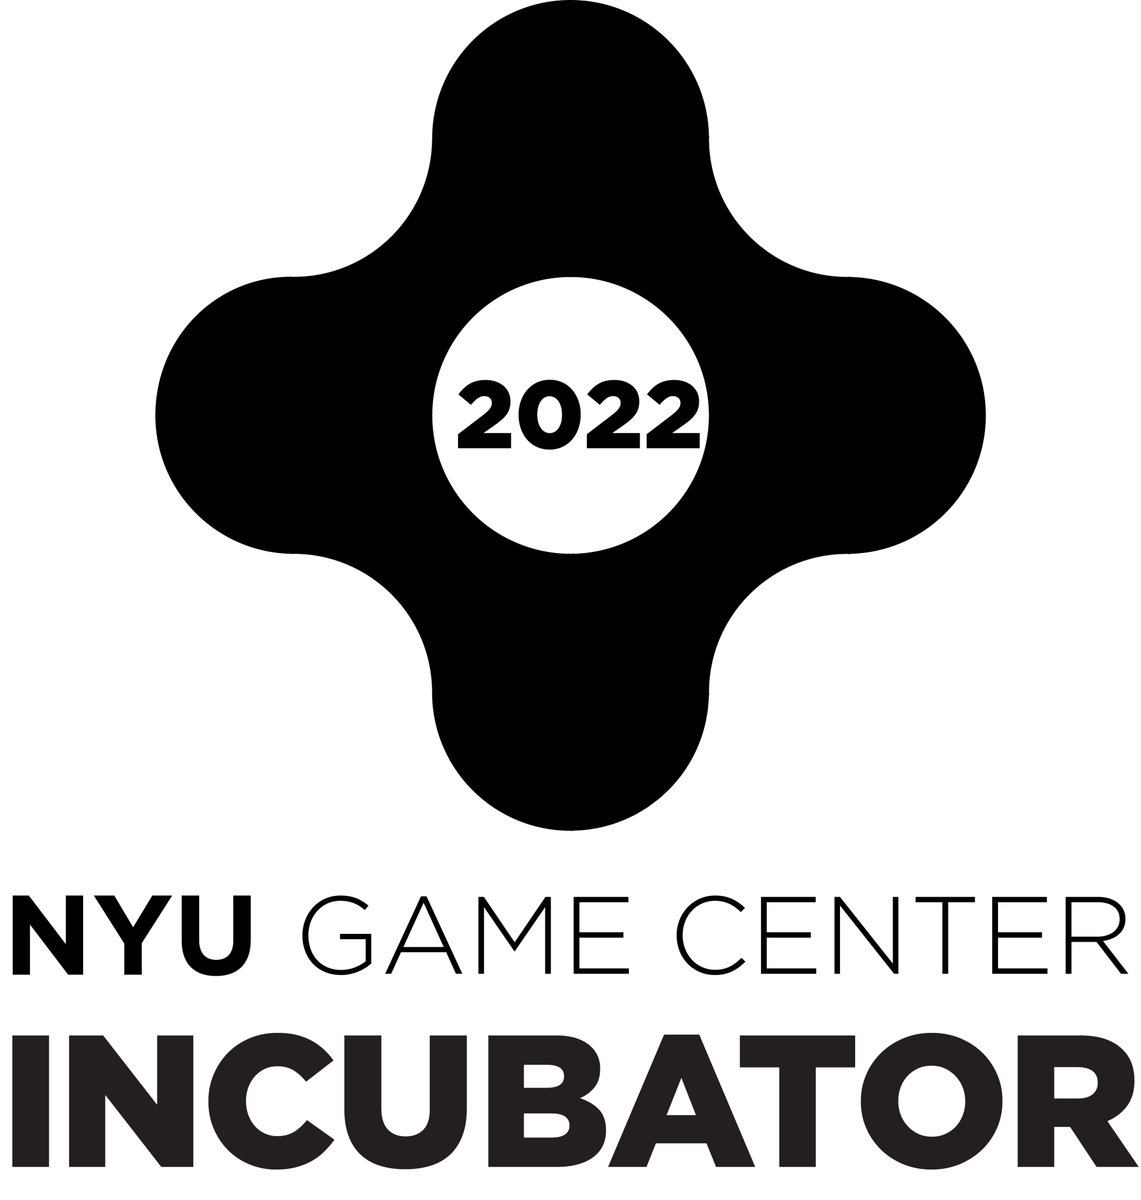 A BIG Thursday today! 🎉 4:00pm - Incubator 2022 Q&A Session Open to the public, RSVP here: forms.gle/t56gx3z2EzF6PT… 5:30pm - Playtest Thursday (NYU students only!) 7:00pm - NYU Game Center Lecture Series Presents @Andy_Makes & @ra! Streaming live: twitch.tv/nyugamecenter